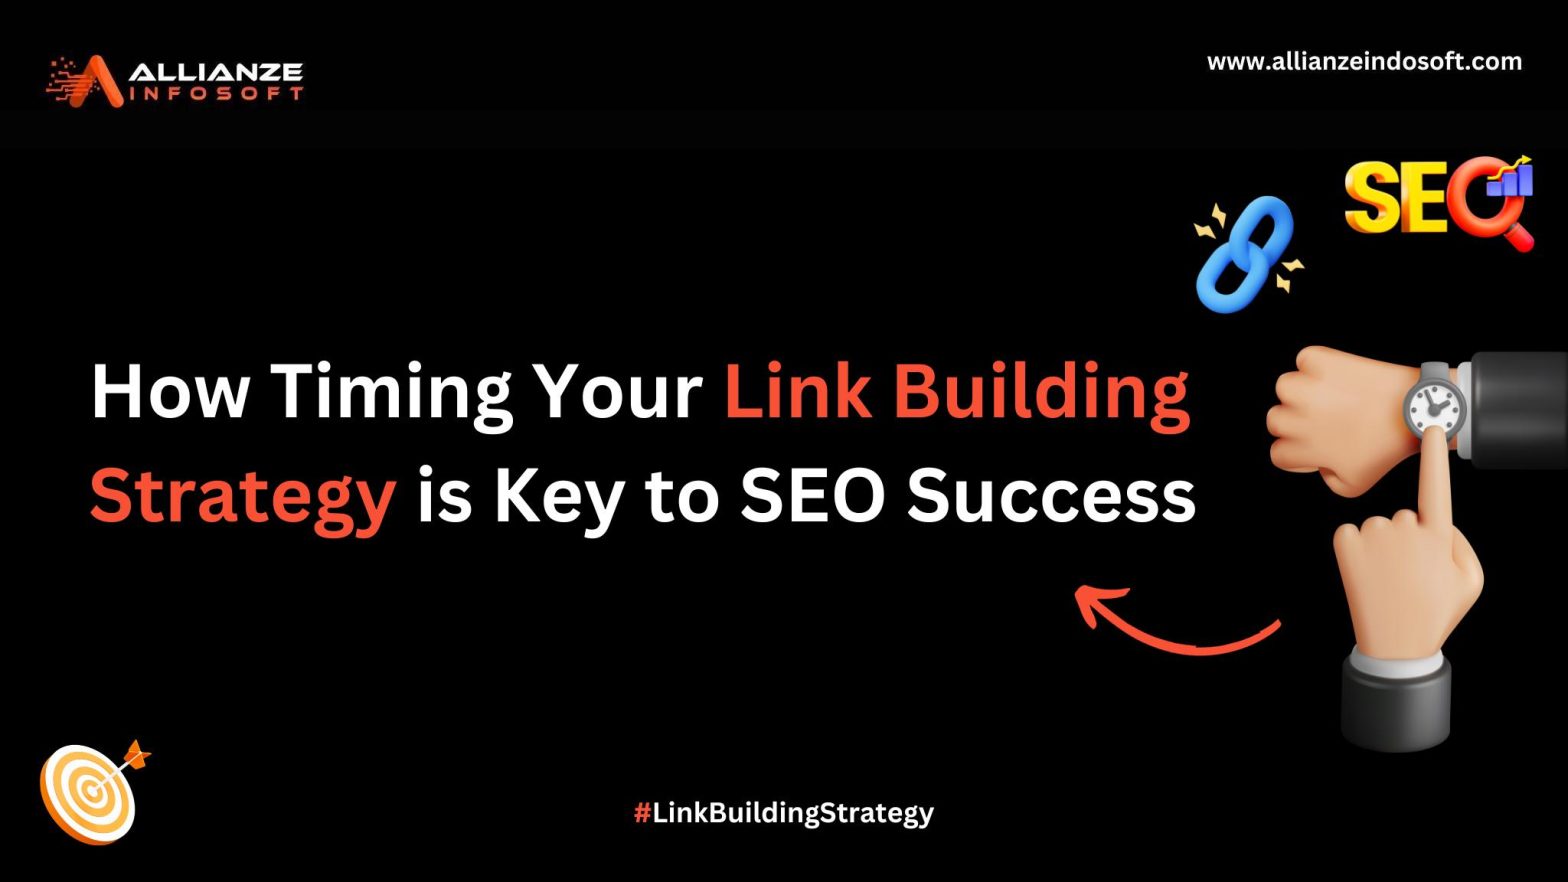 How-Timing-Your-Link-Building-Strategy-is-Key-to-SEO-Success